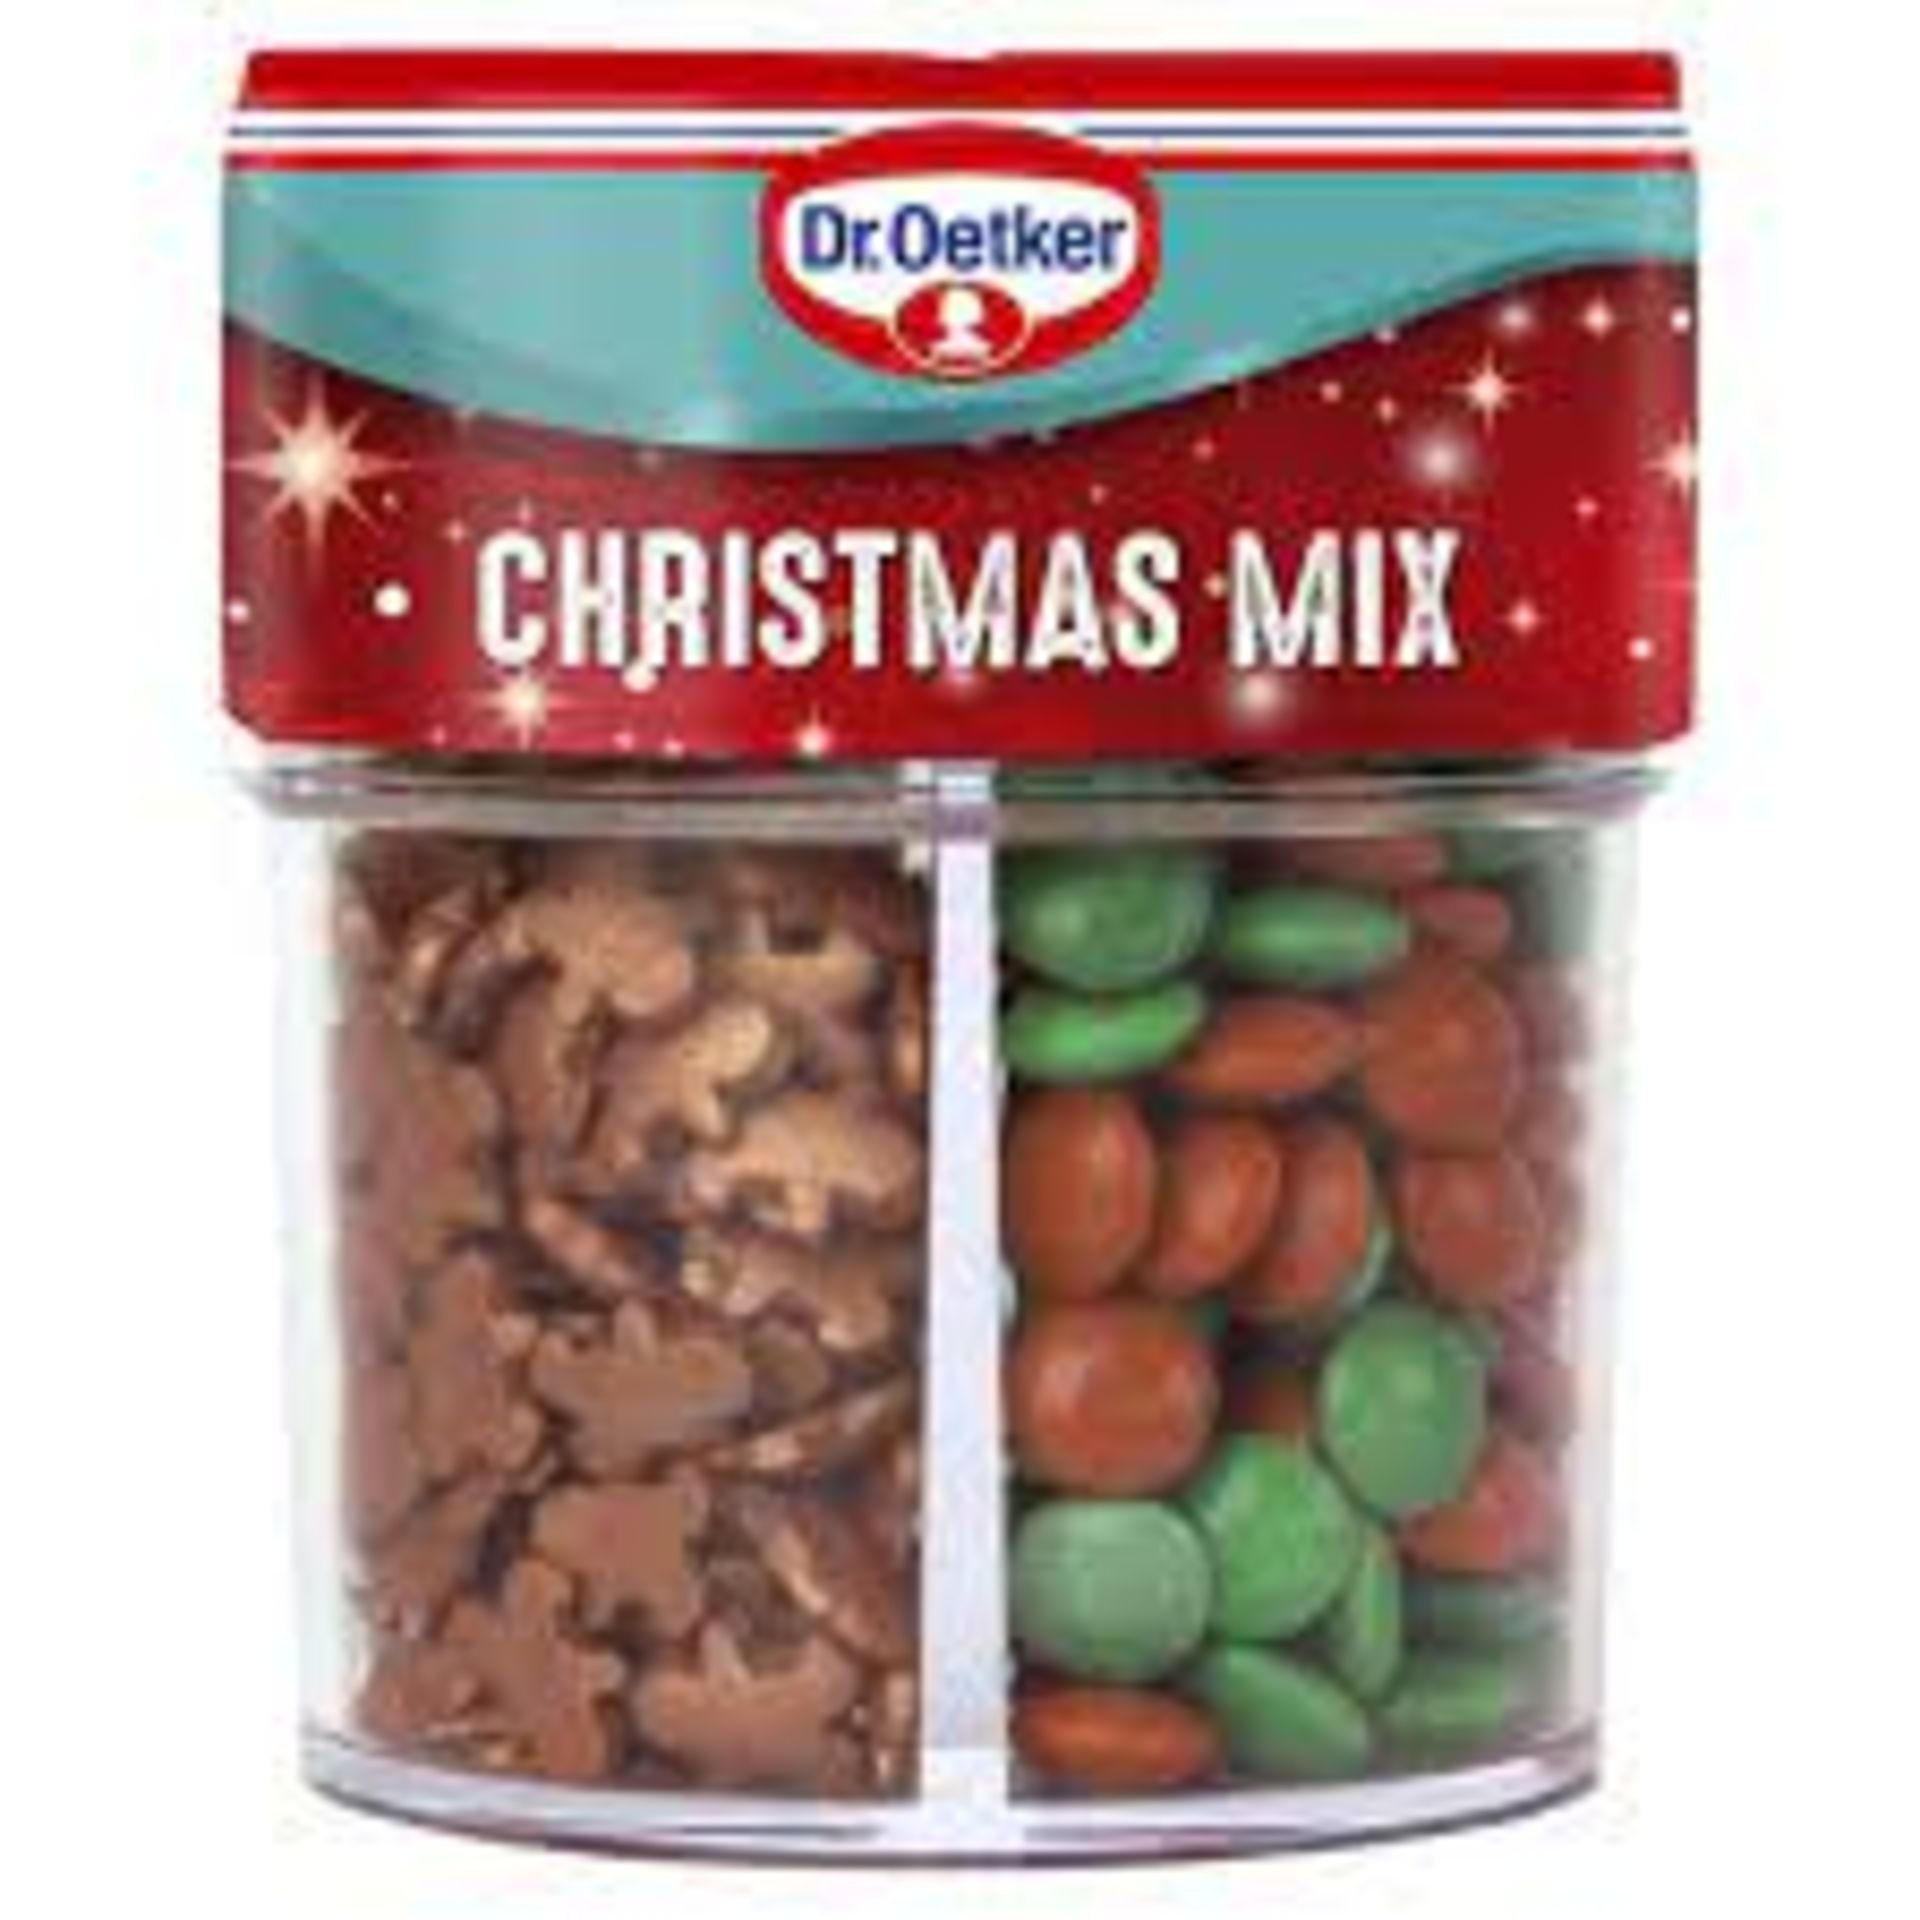 RRP £853 (Approx Count 93) (F90) spW56L5284s 9 x Dr. Oetker Christmas Sprinkles Mix, 4 x 76g, Red